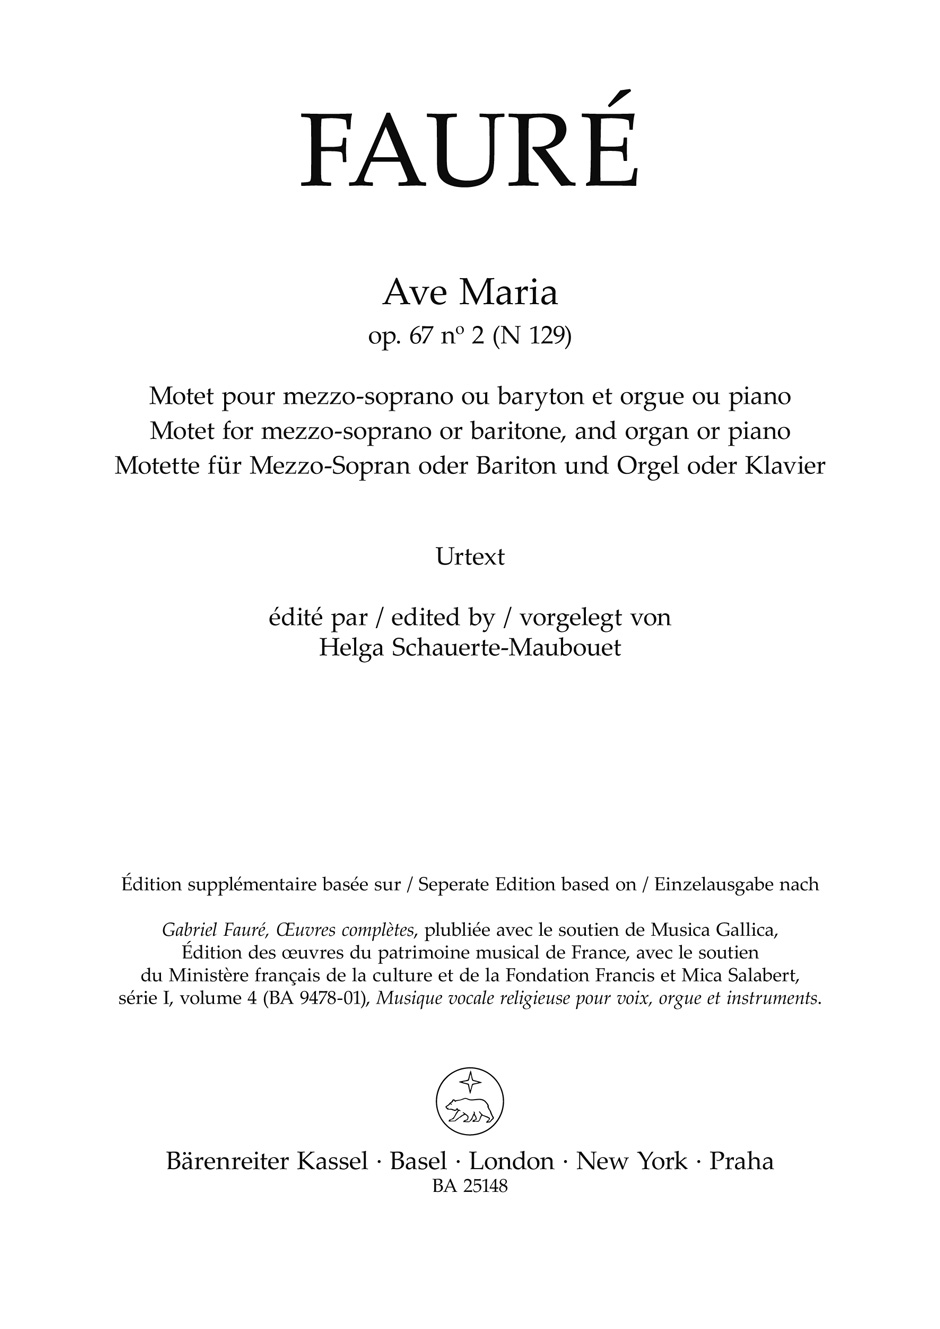 Faure Ave Maria Op67/2 N 129 Choral Score Sheet Music Songbook